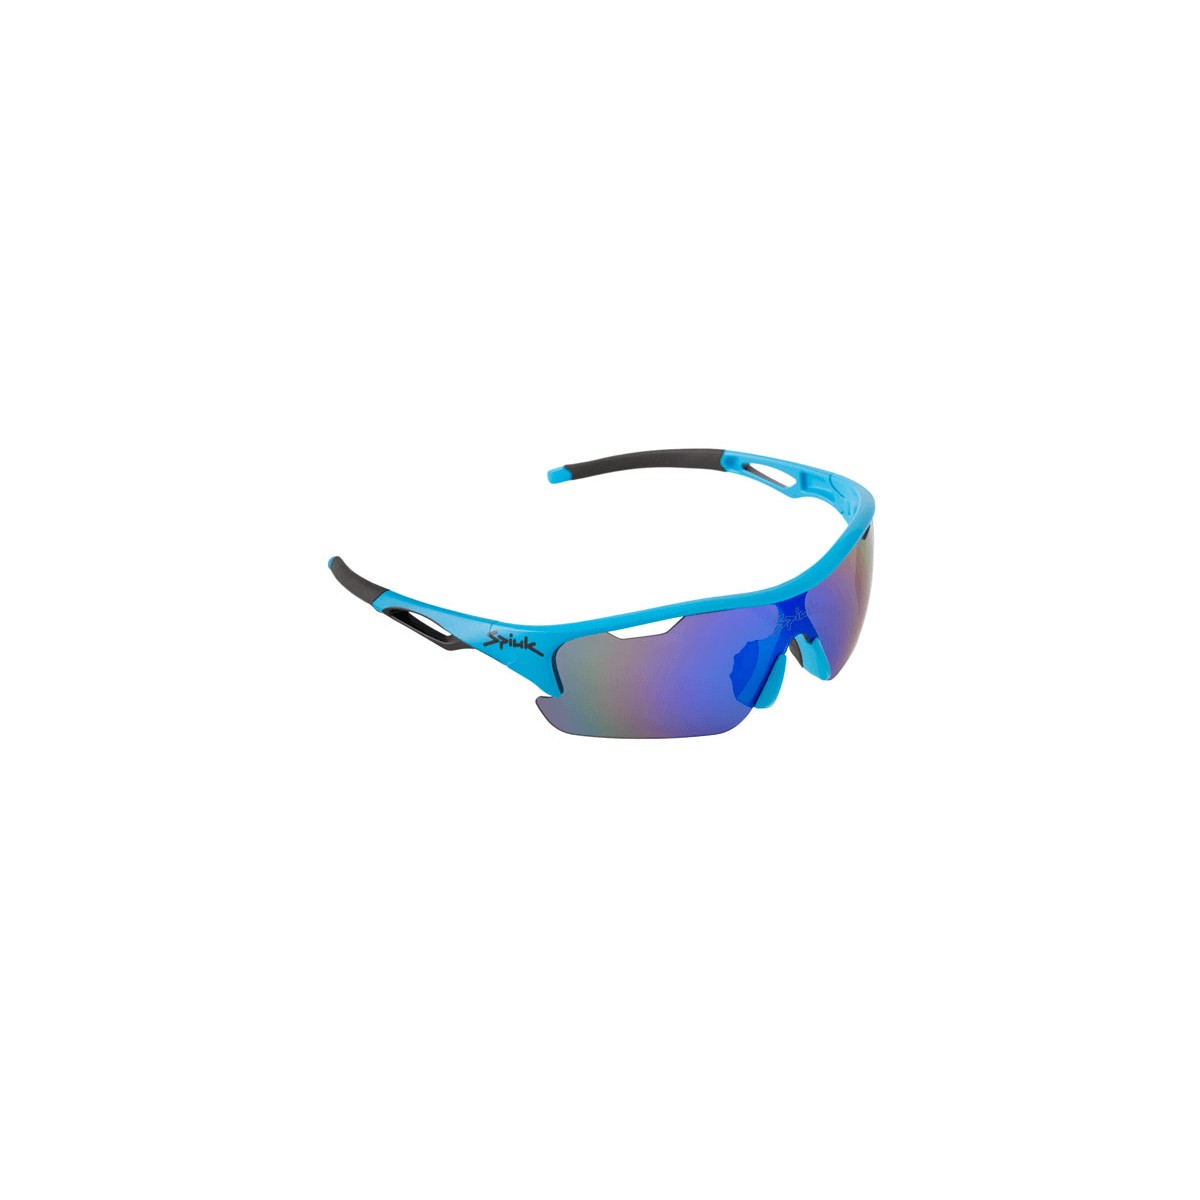 Spiuk Jifter Cycling Glasses Blue / Black Blue Mirror Lenses